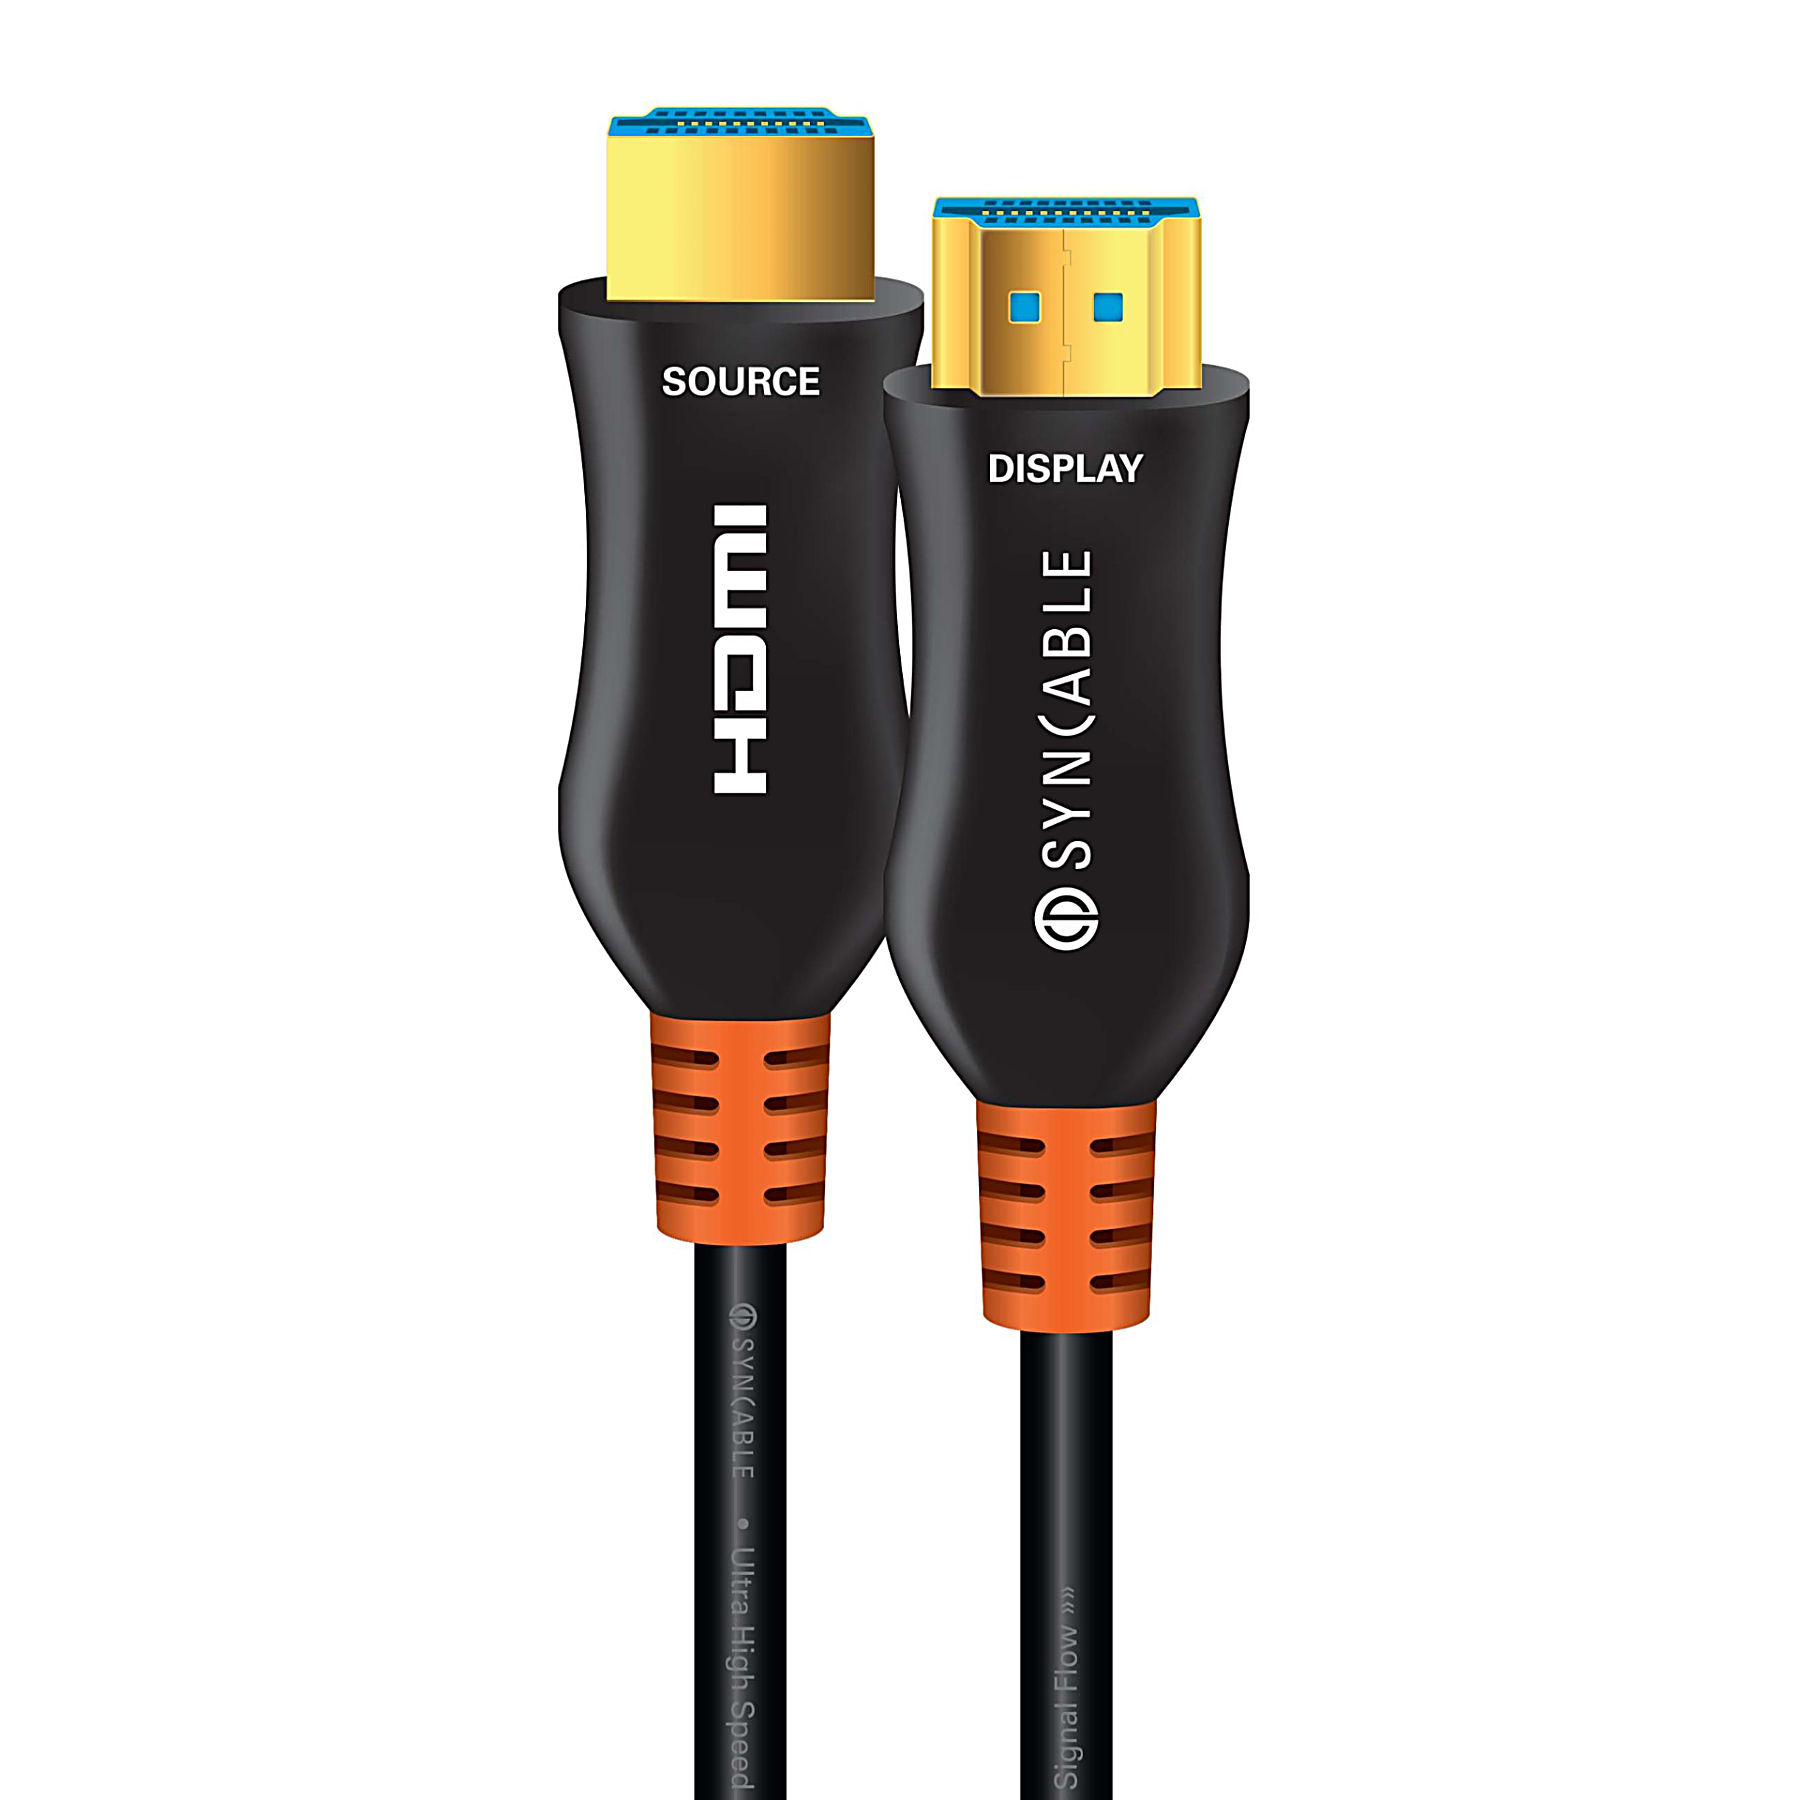 SyncWire SW-HDMI-6M 6M Pro-Grade High Speed 4K HDMI Cable With Ether